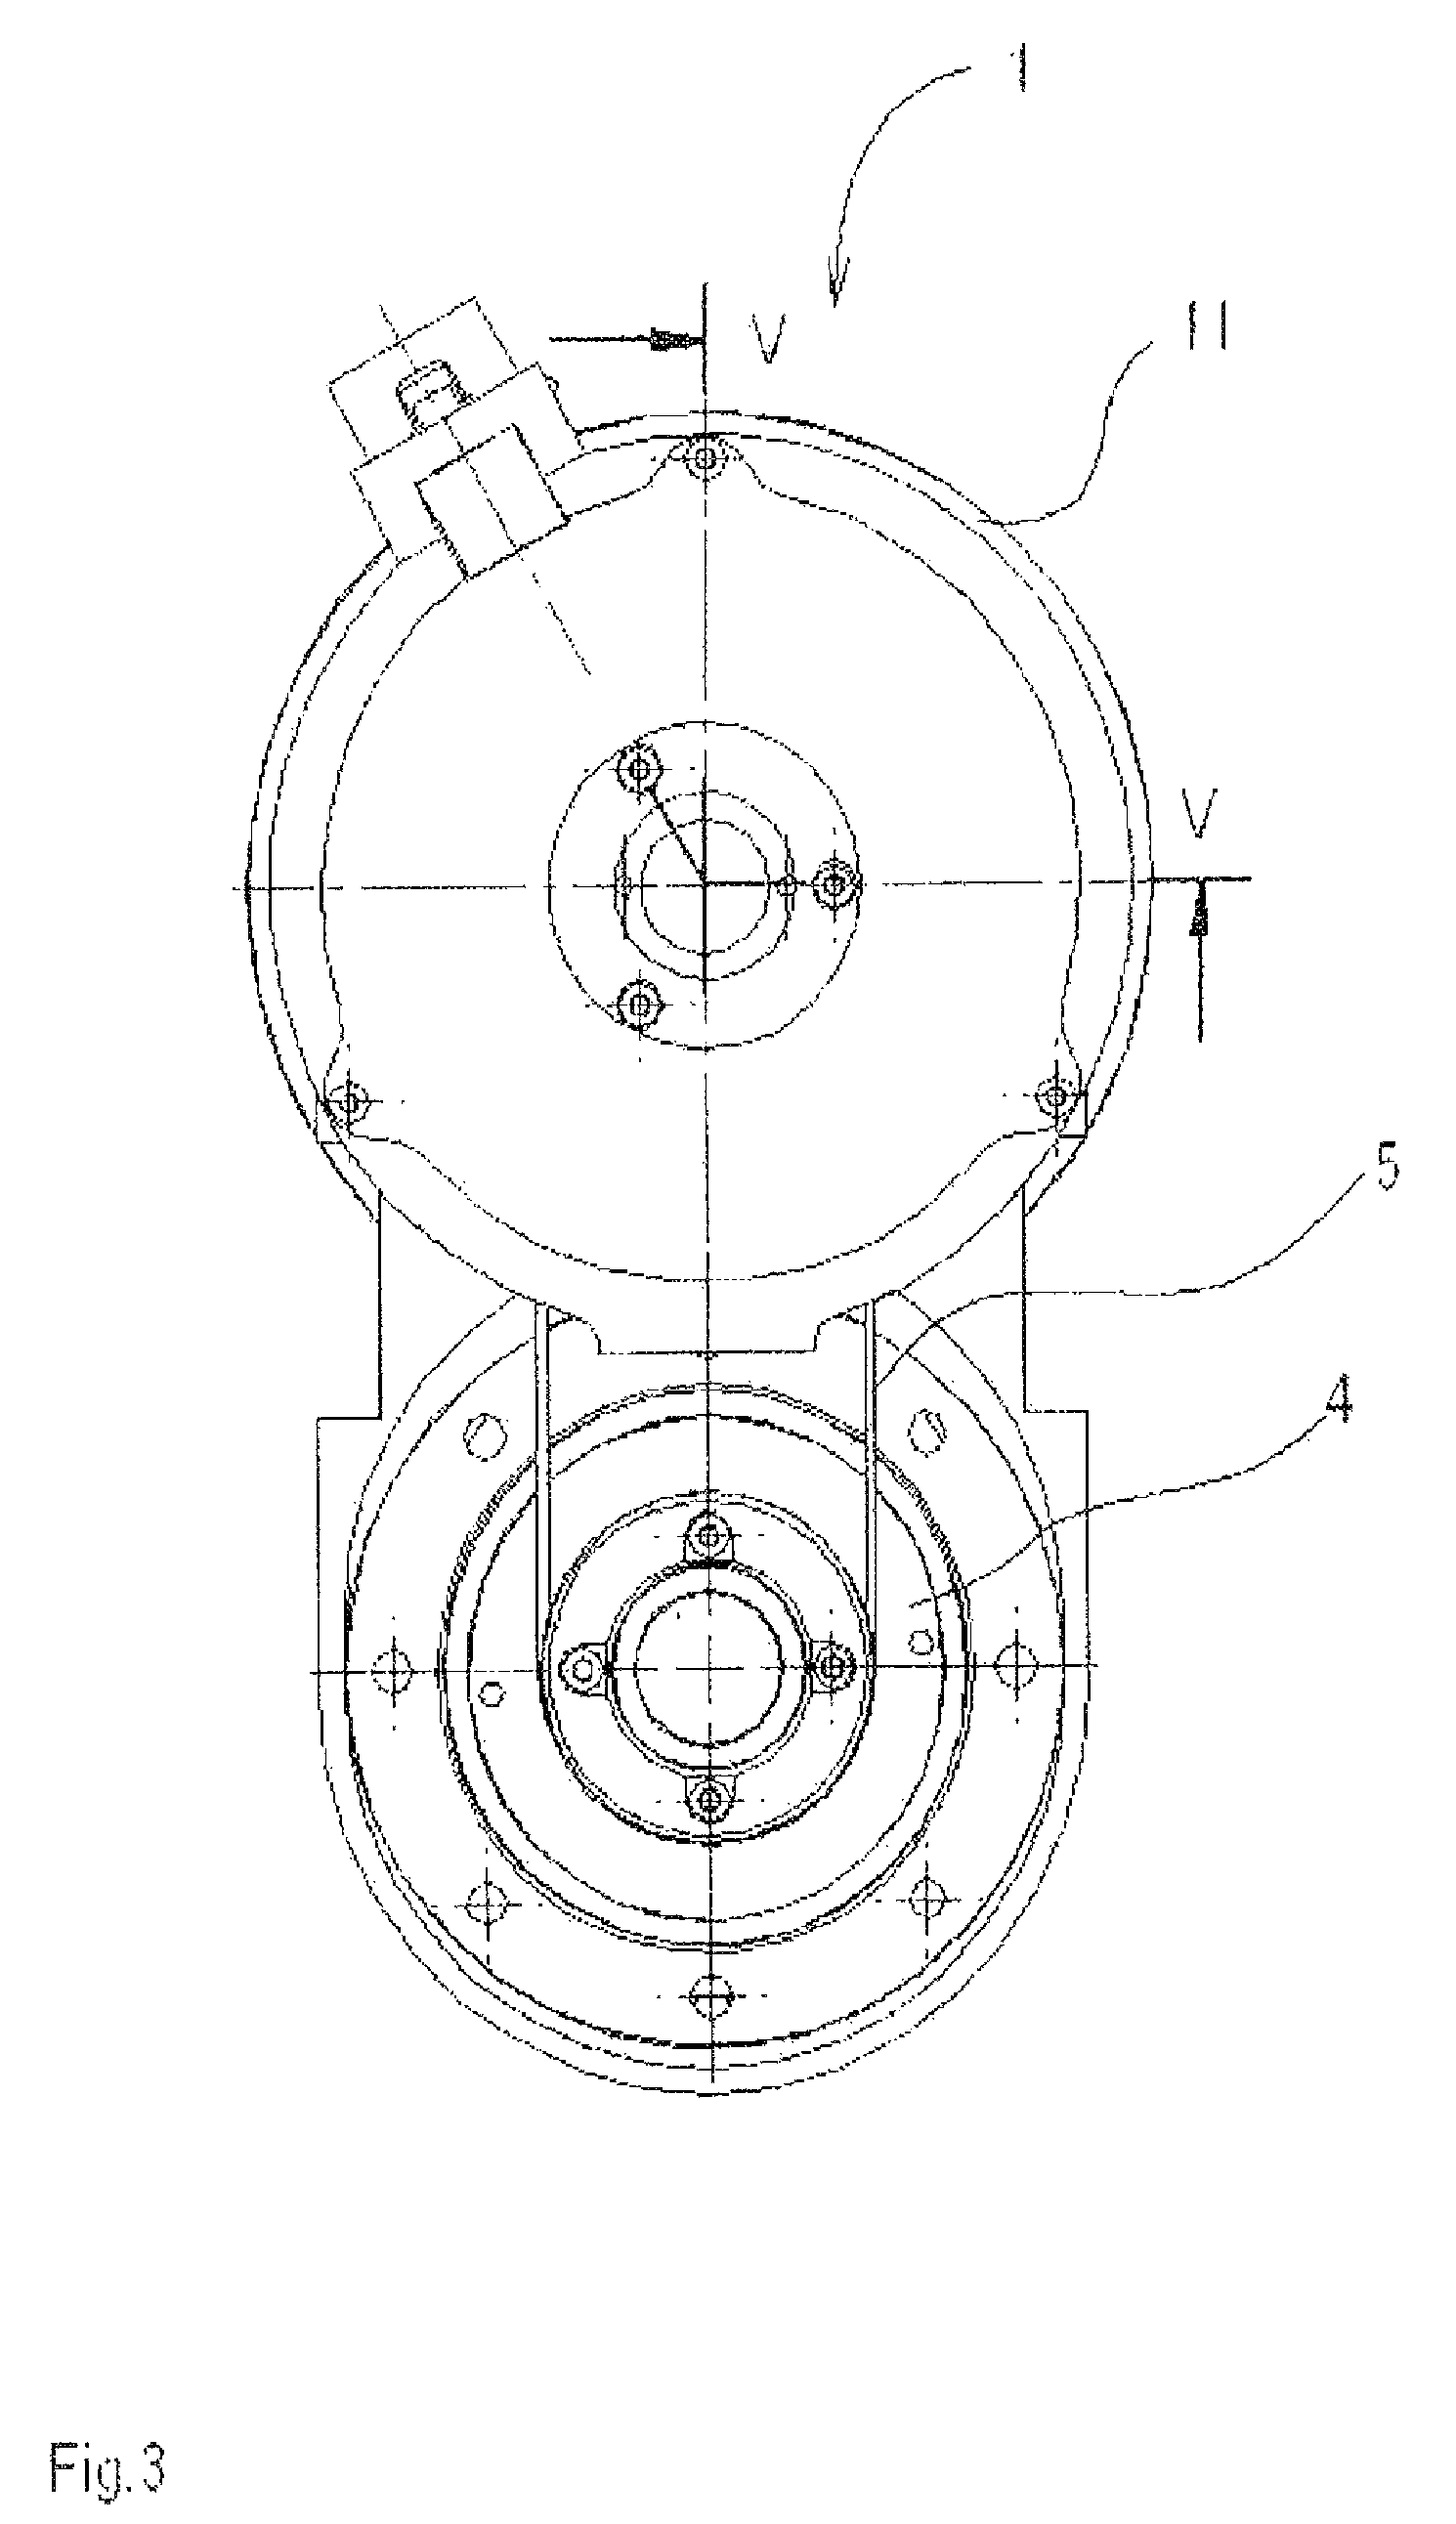 Method of chucking a tool or a workpiece and apparatus for carrying out the method